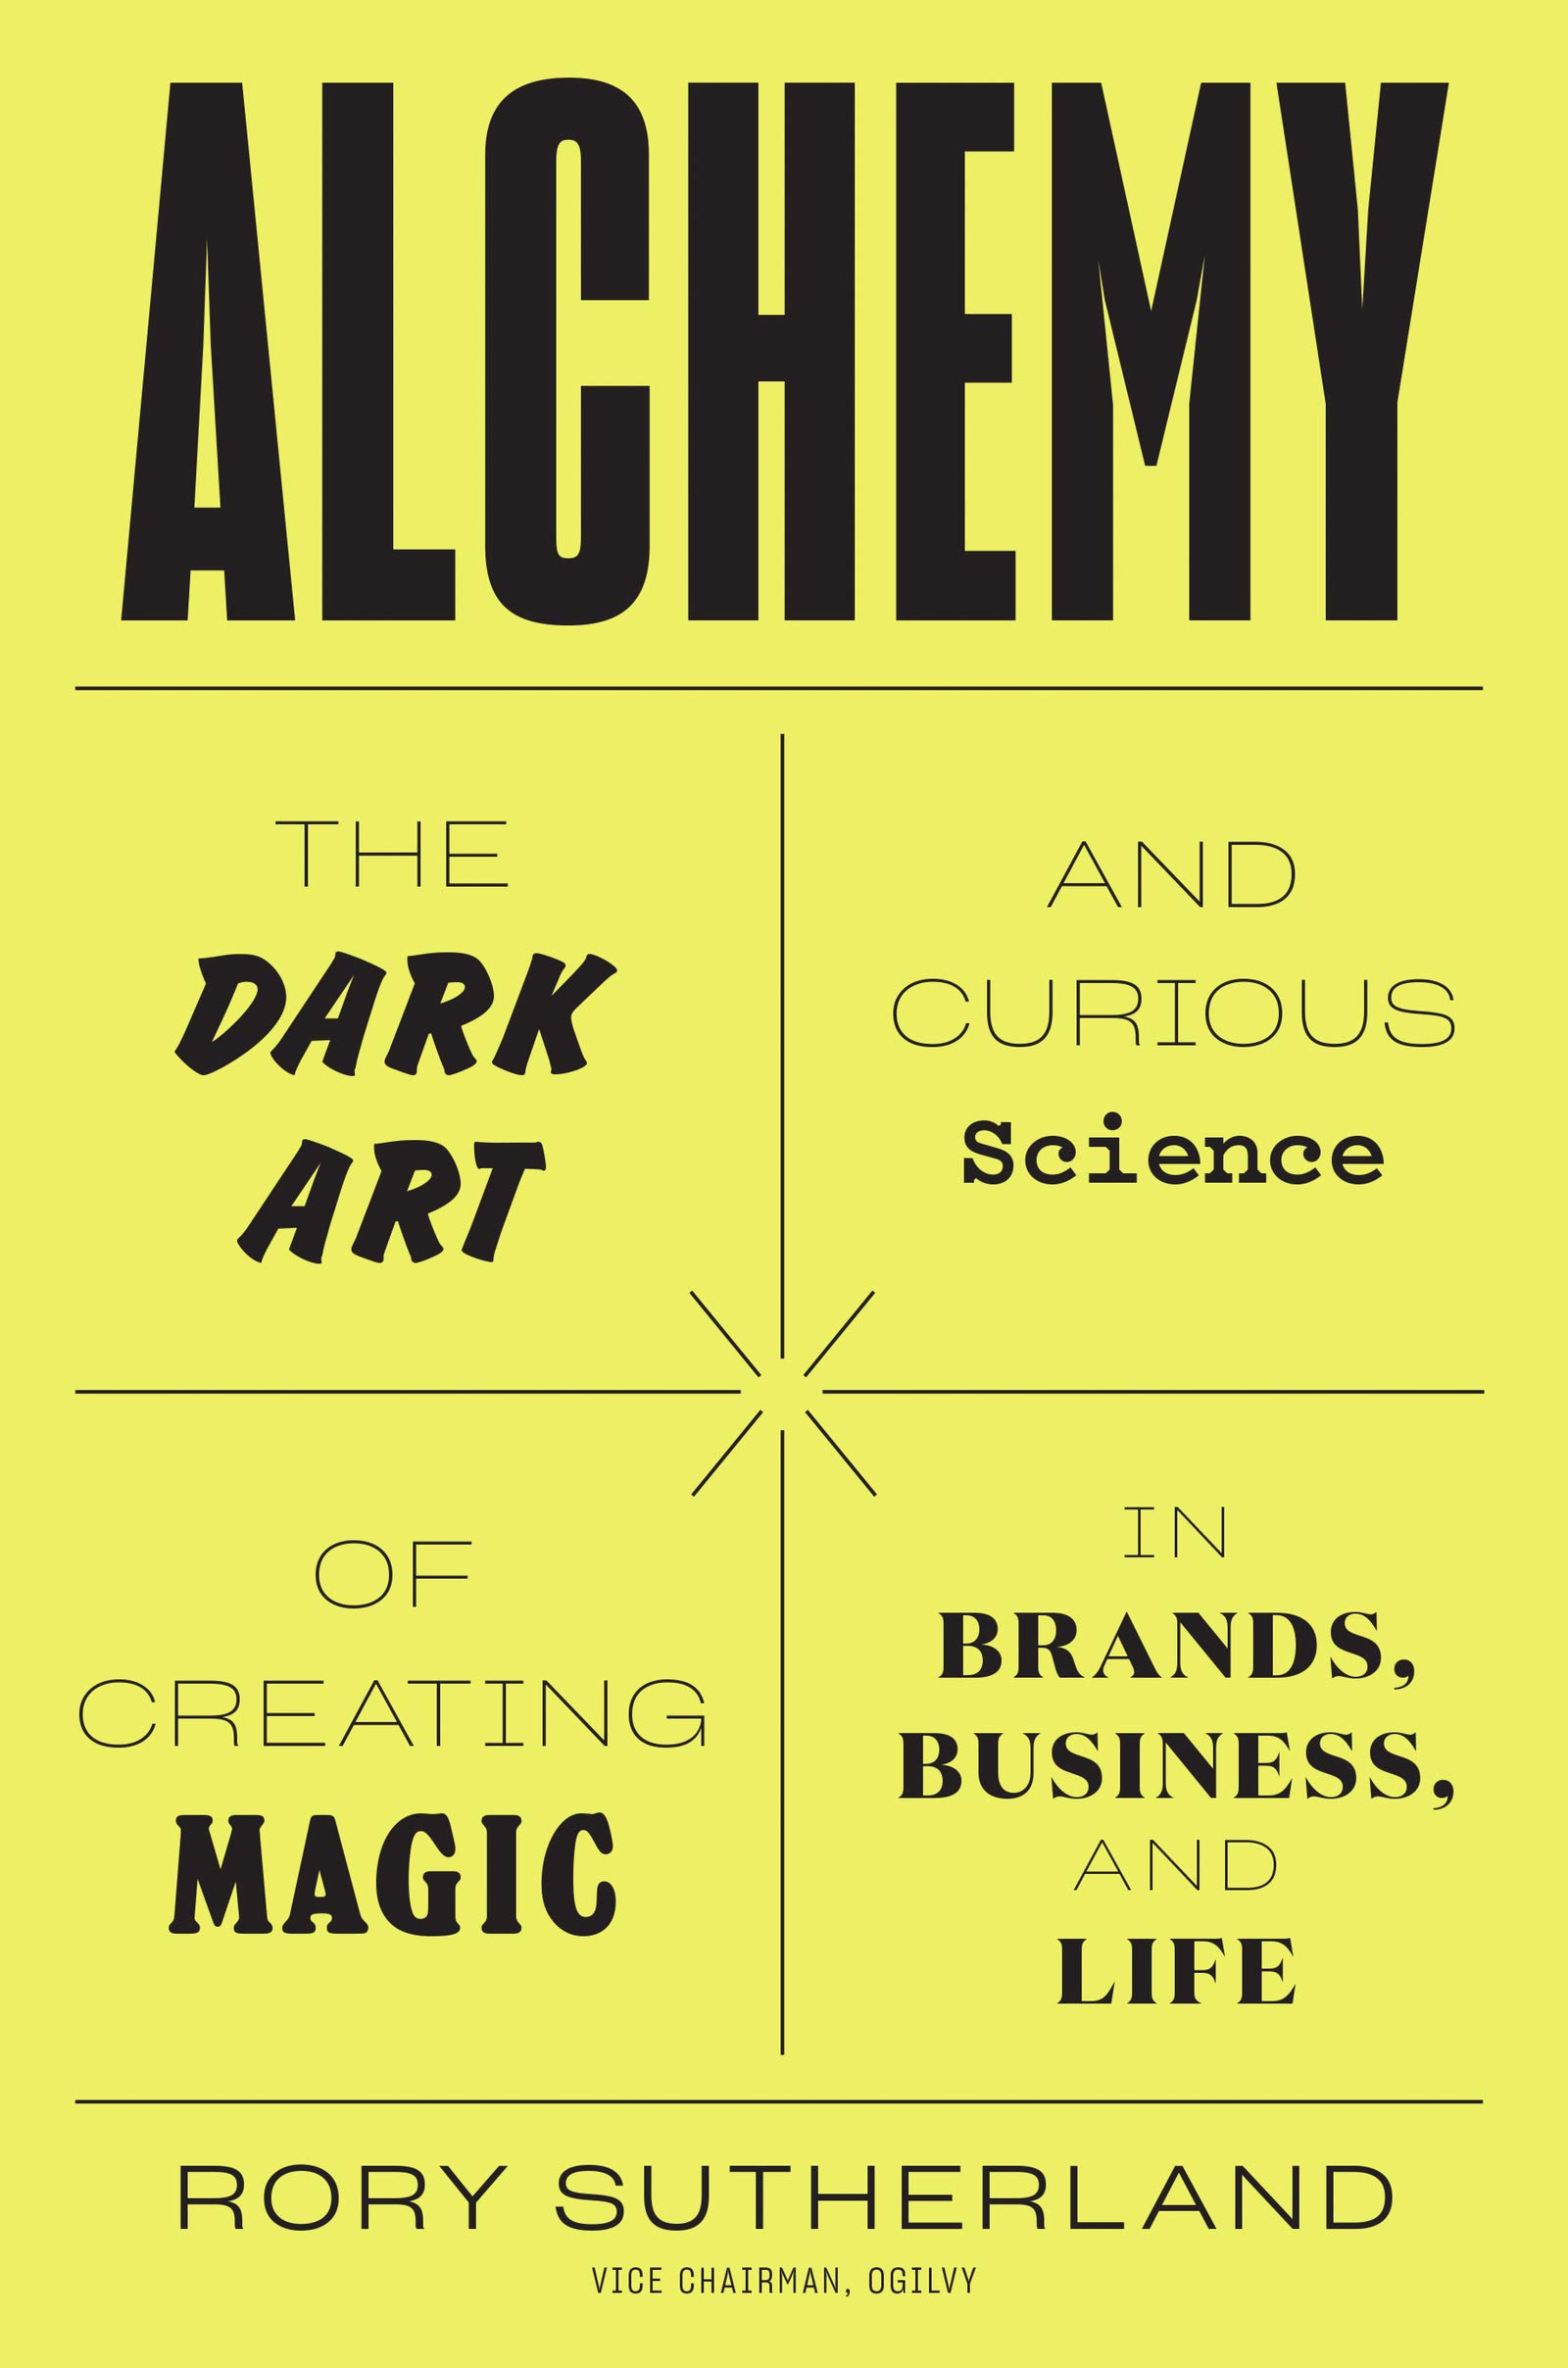 Alchemy: The Dark Art and Curious Science of Creating Magic in Brands, Business, and Life – How can we encourage more women to pursue tech careers?